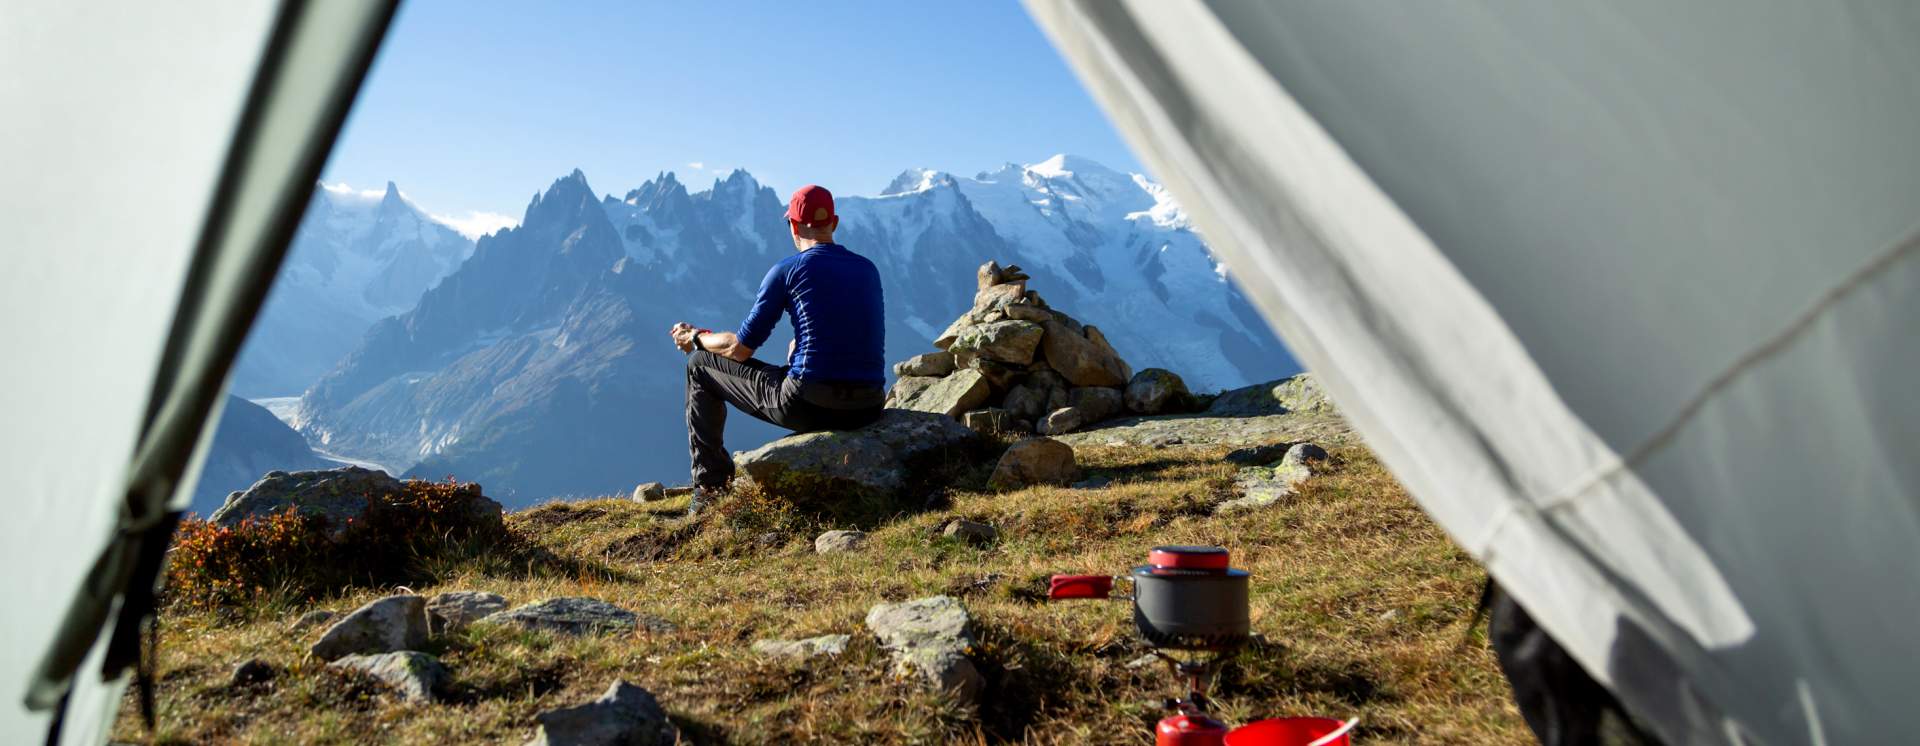 Hiking - Bivouac in the mountains | Chamonix Guides